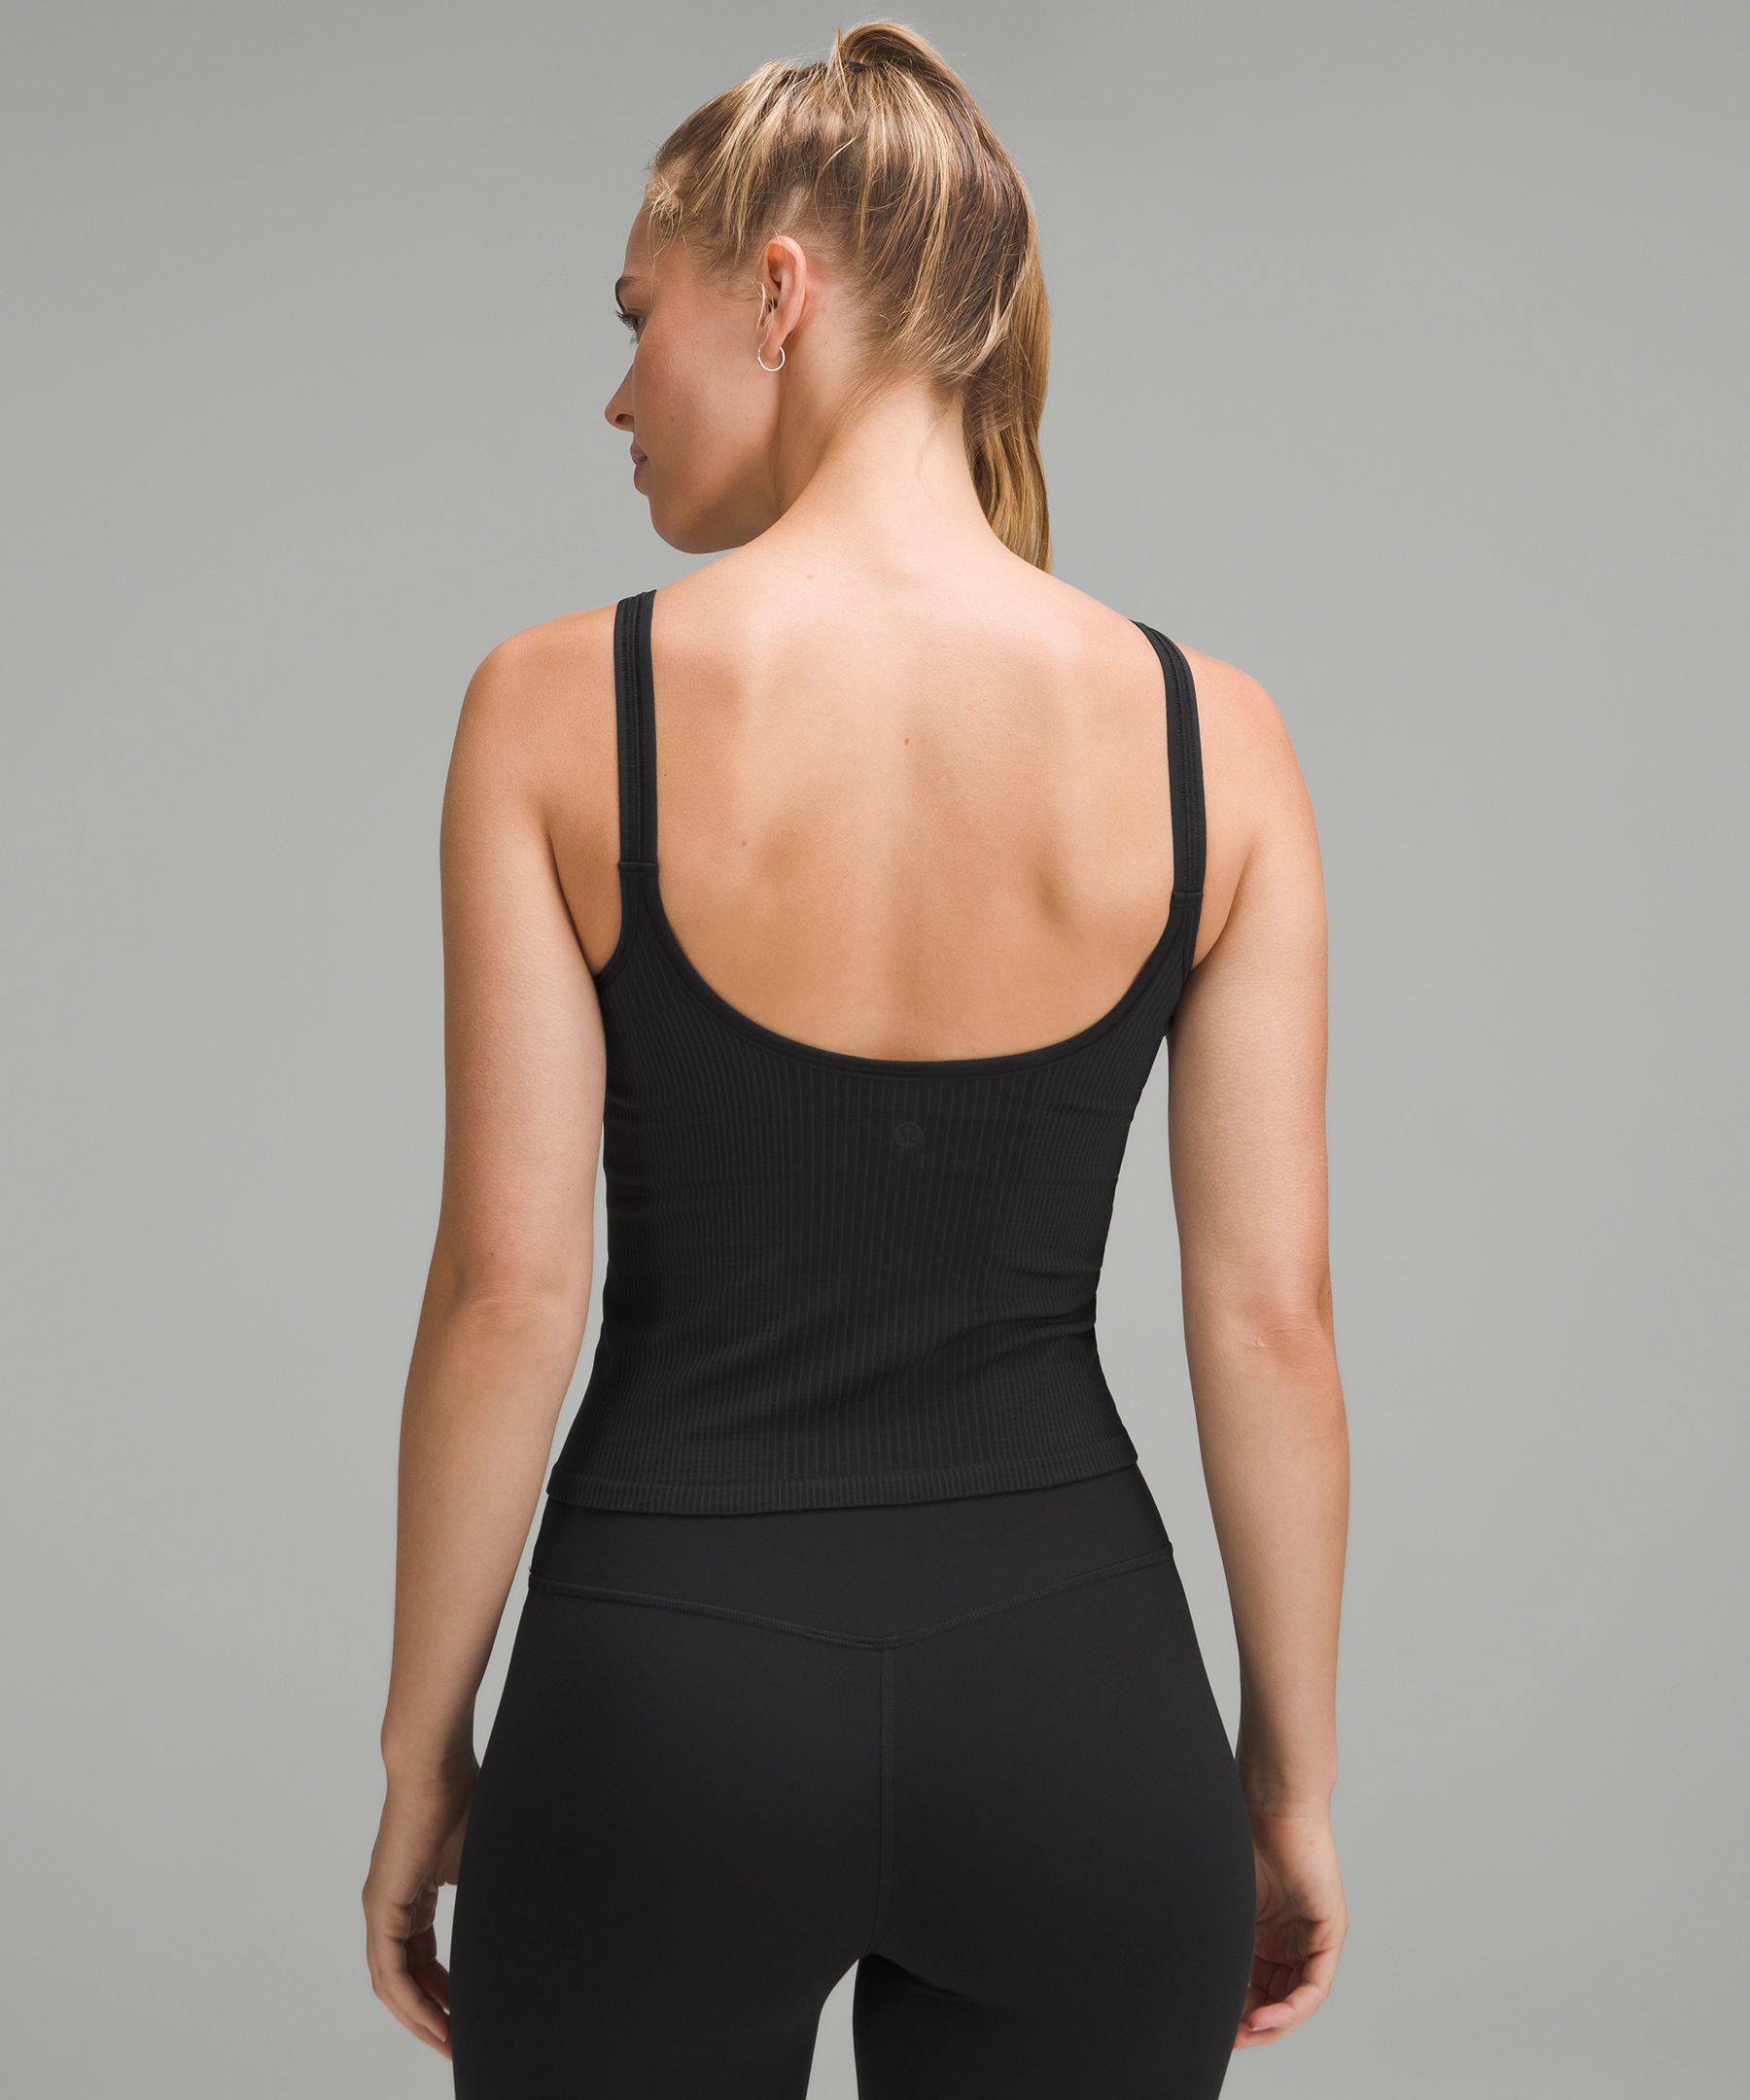 Ebb to Street Scoop-Neck Cropped Tank Top *Light Support, B/C Cup | Women's Sleeveless & Tops